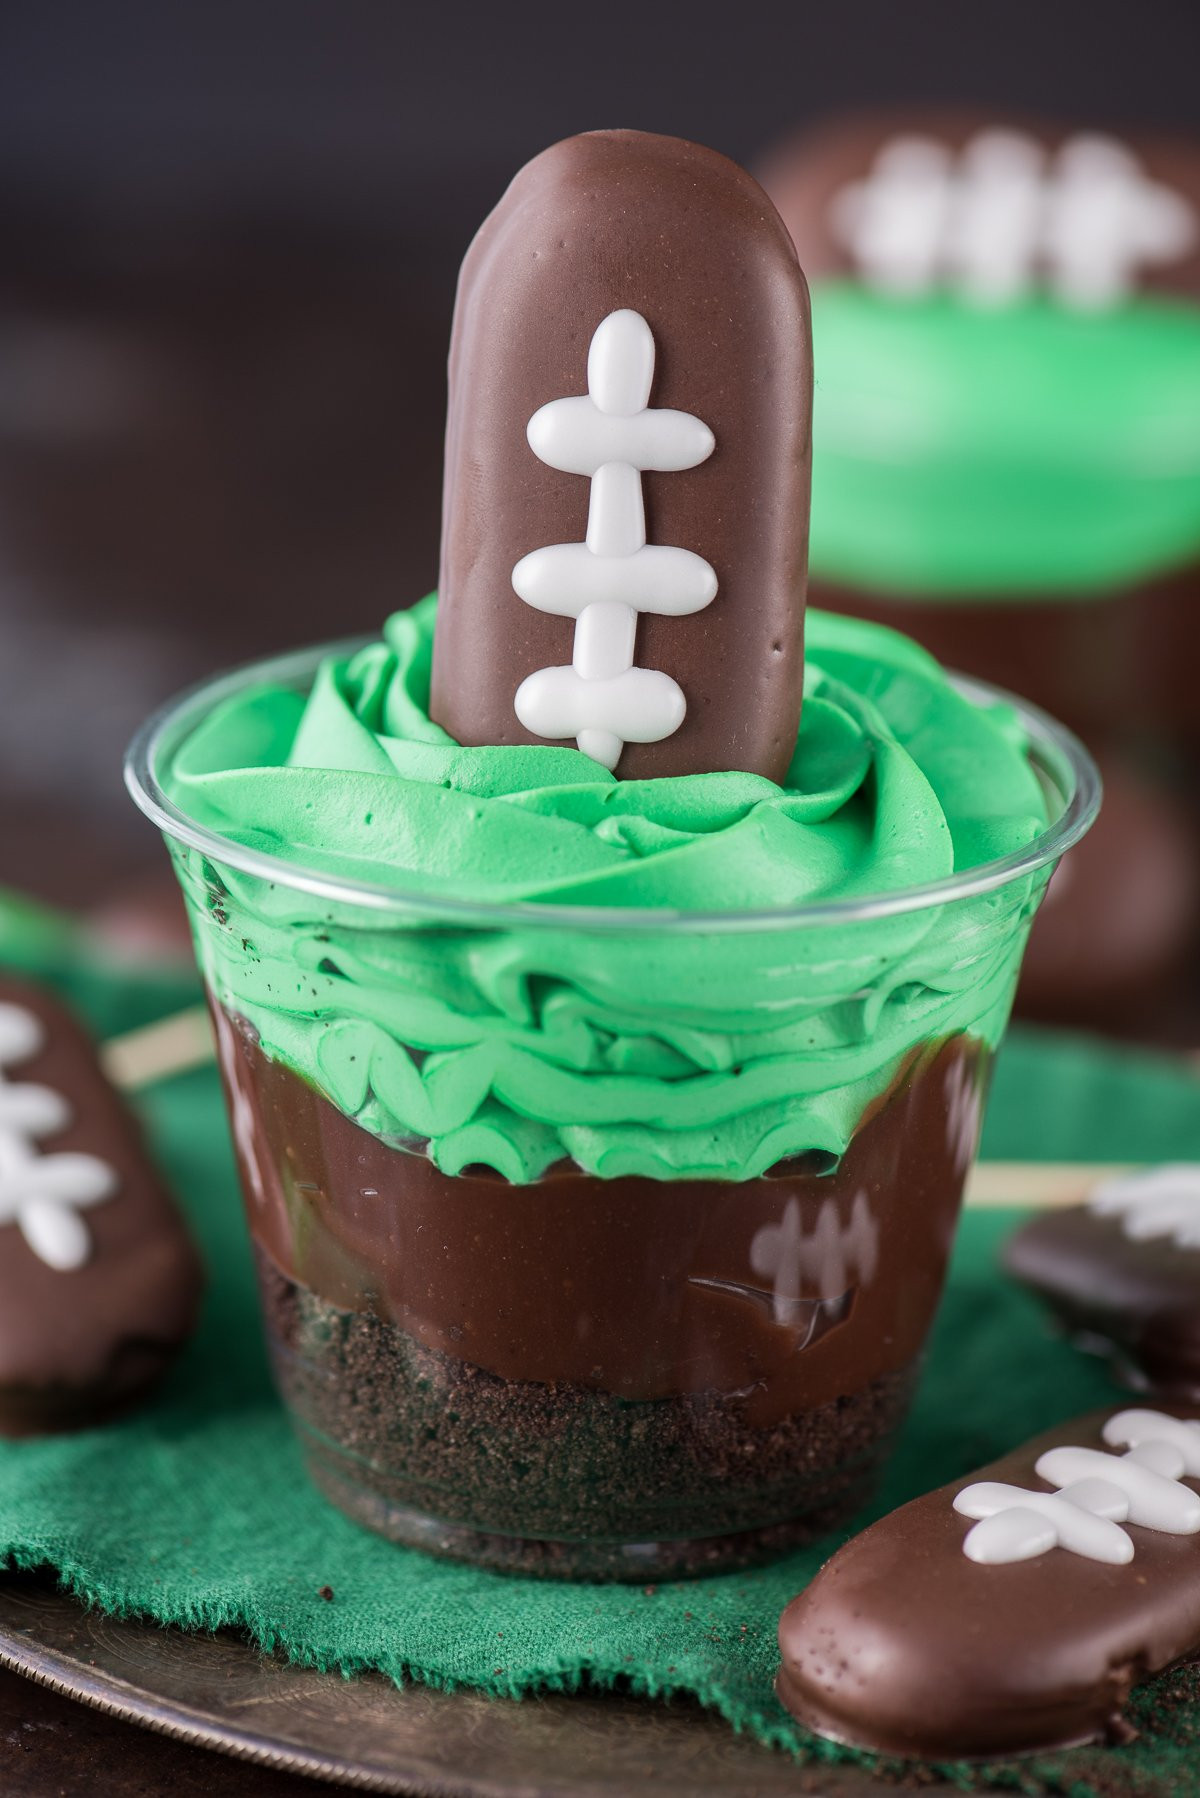 Super Bowl Sweets Recipes
 13 Football Shaped Desserts for an Awesome Super Bowl Party